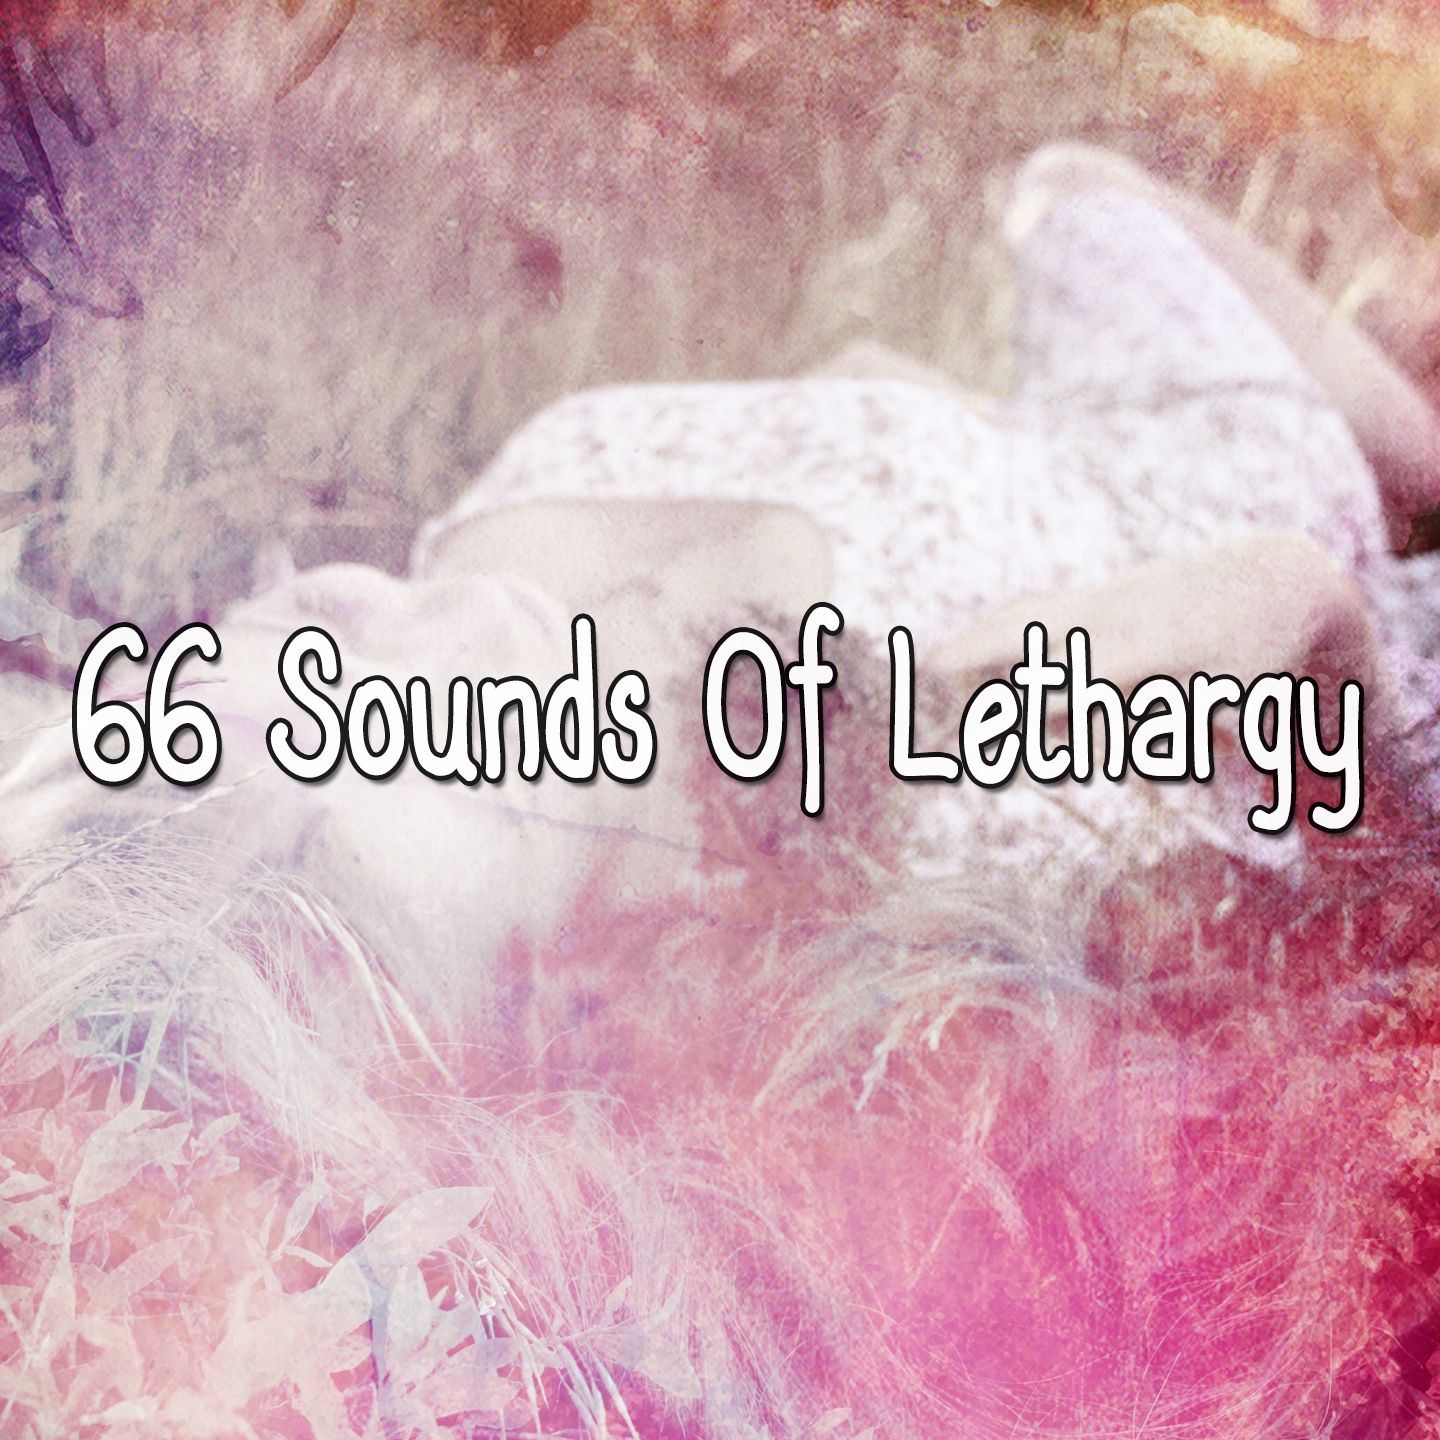 66 Sounds of Lethargy